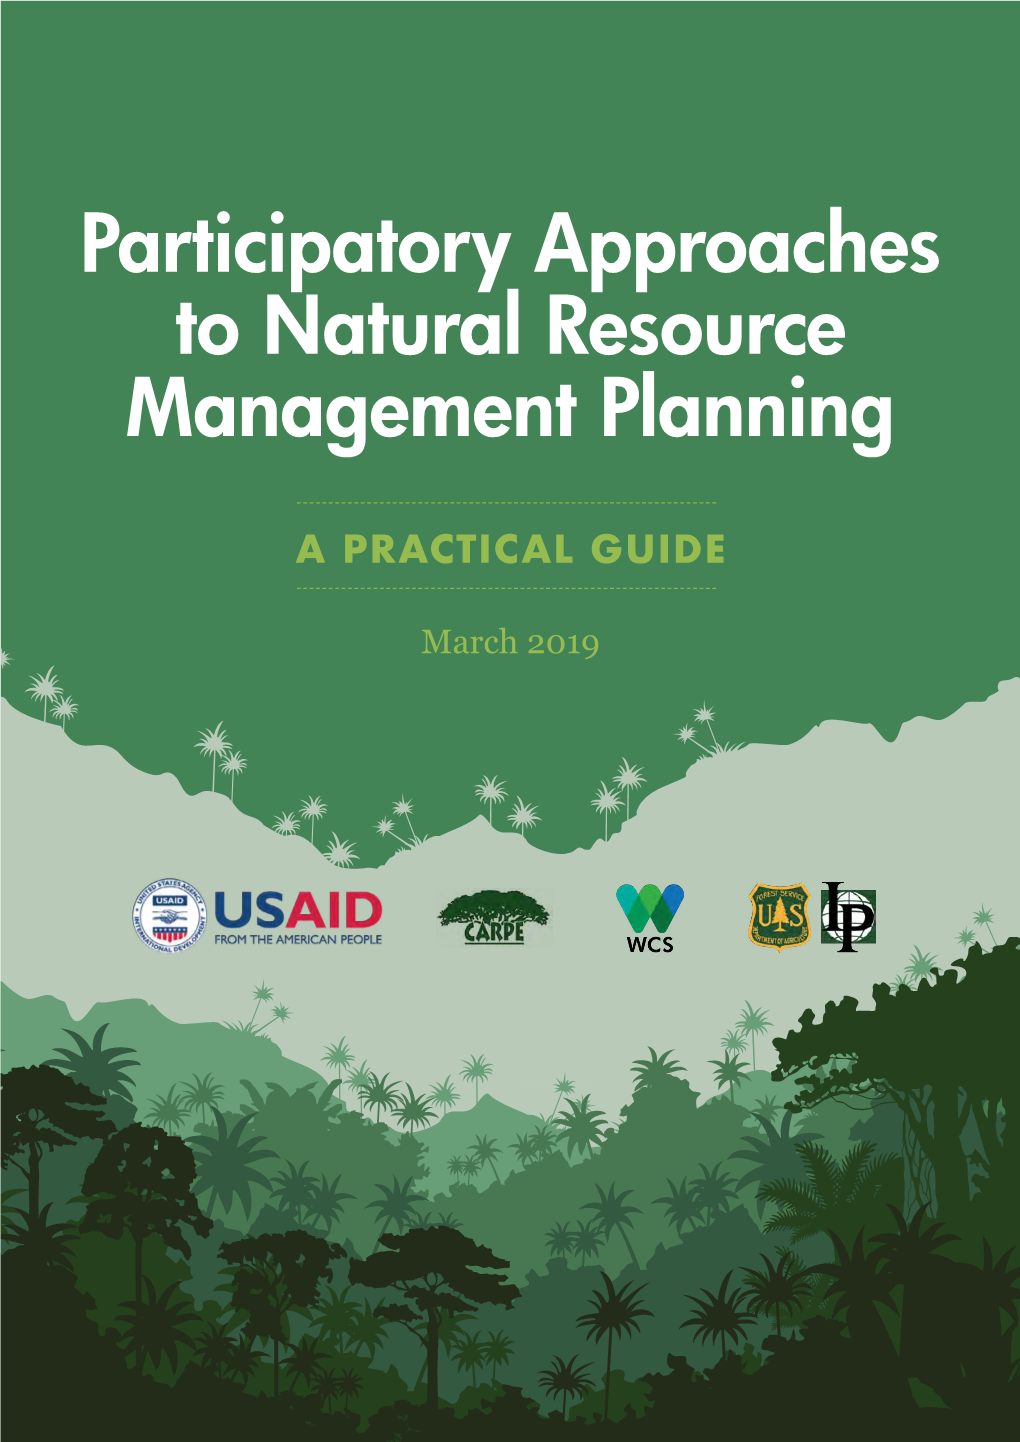 Participatory Approaches to Natural Resource Management Planning